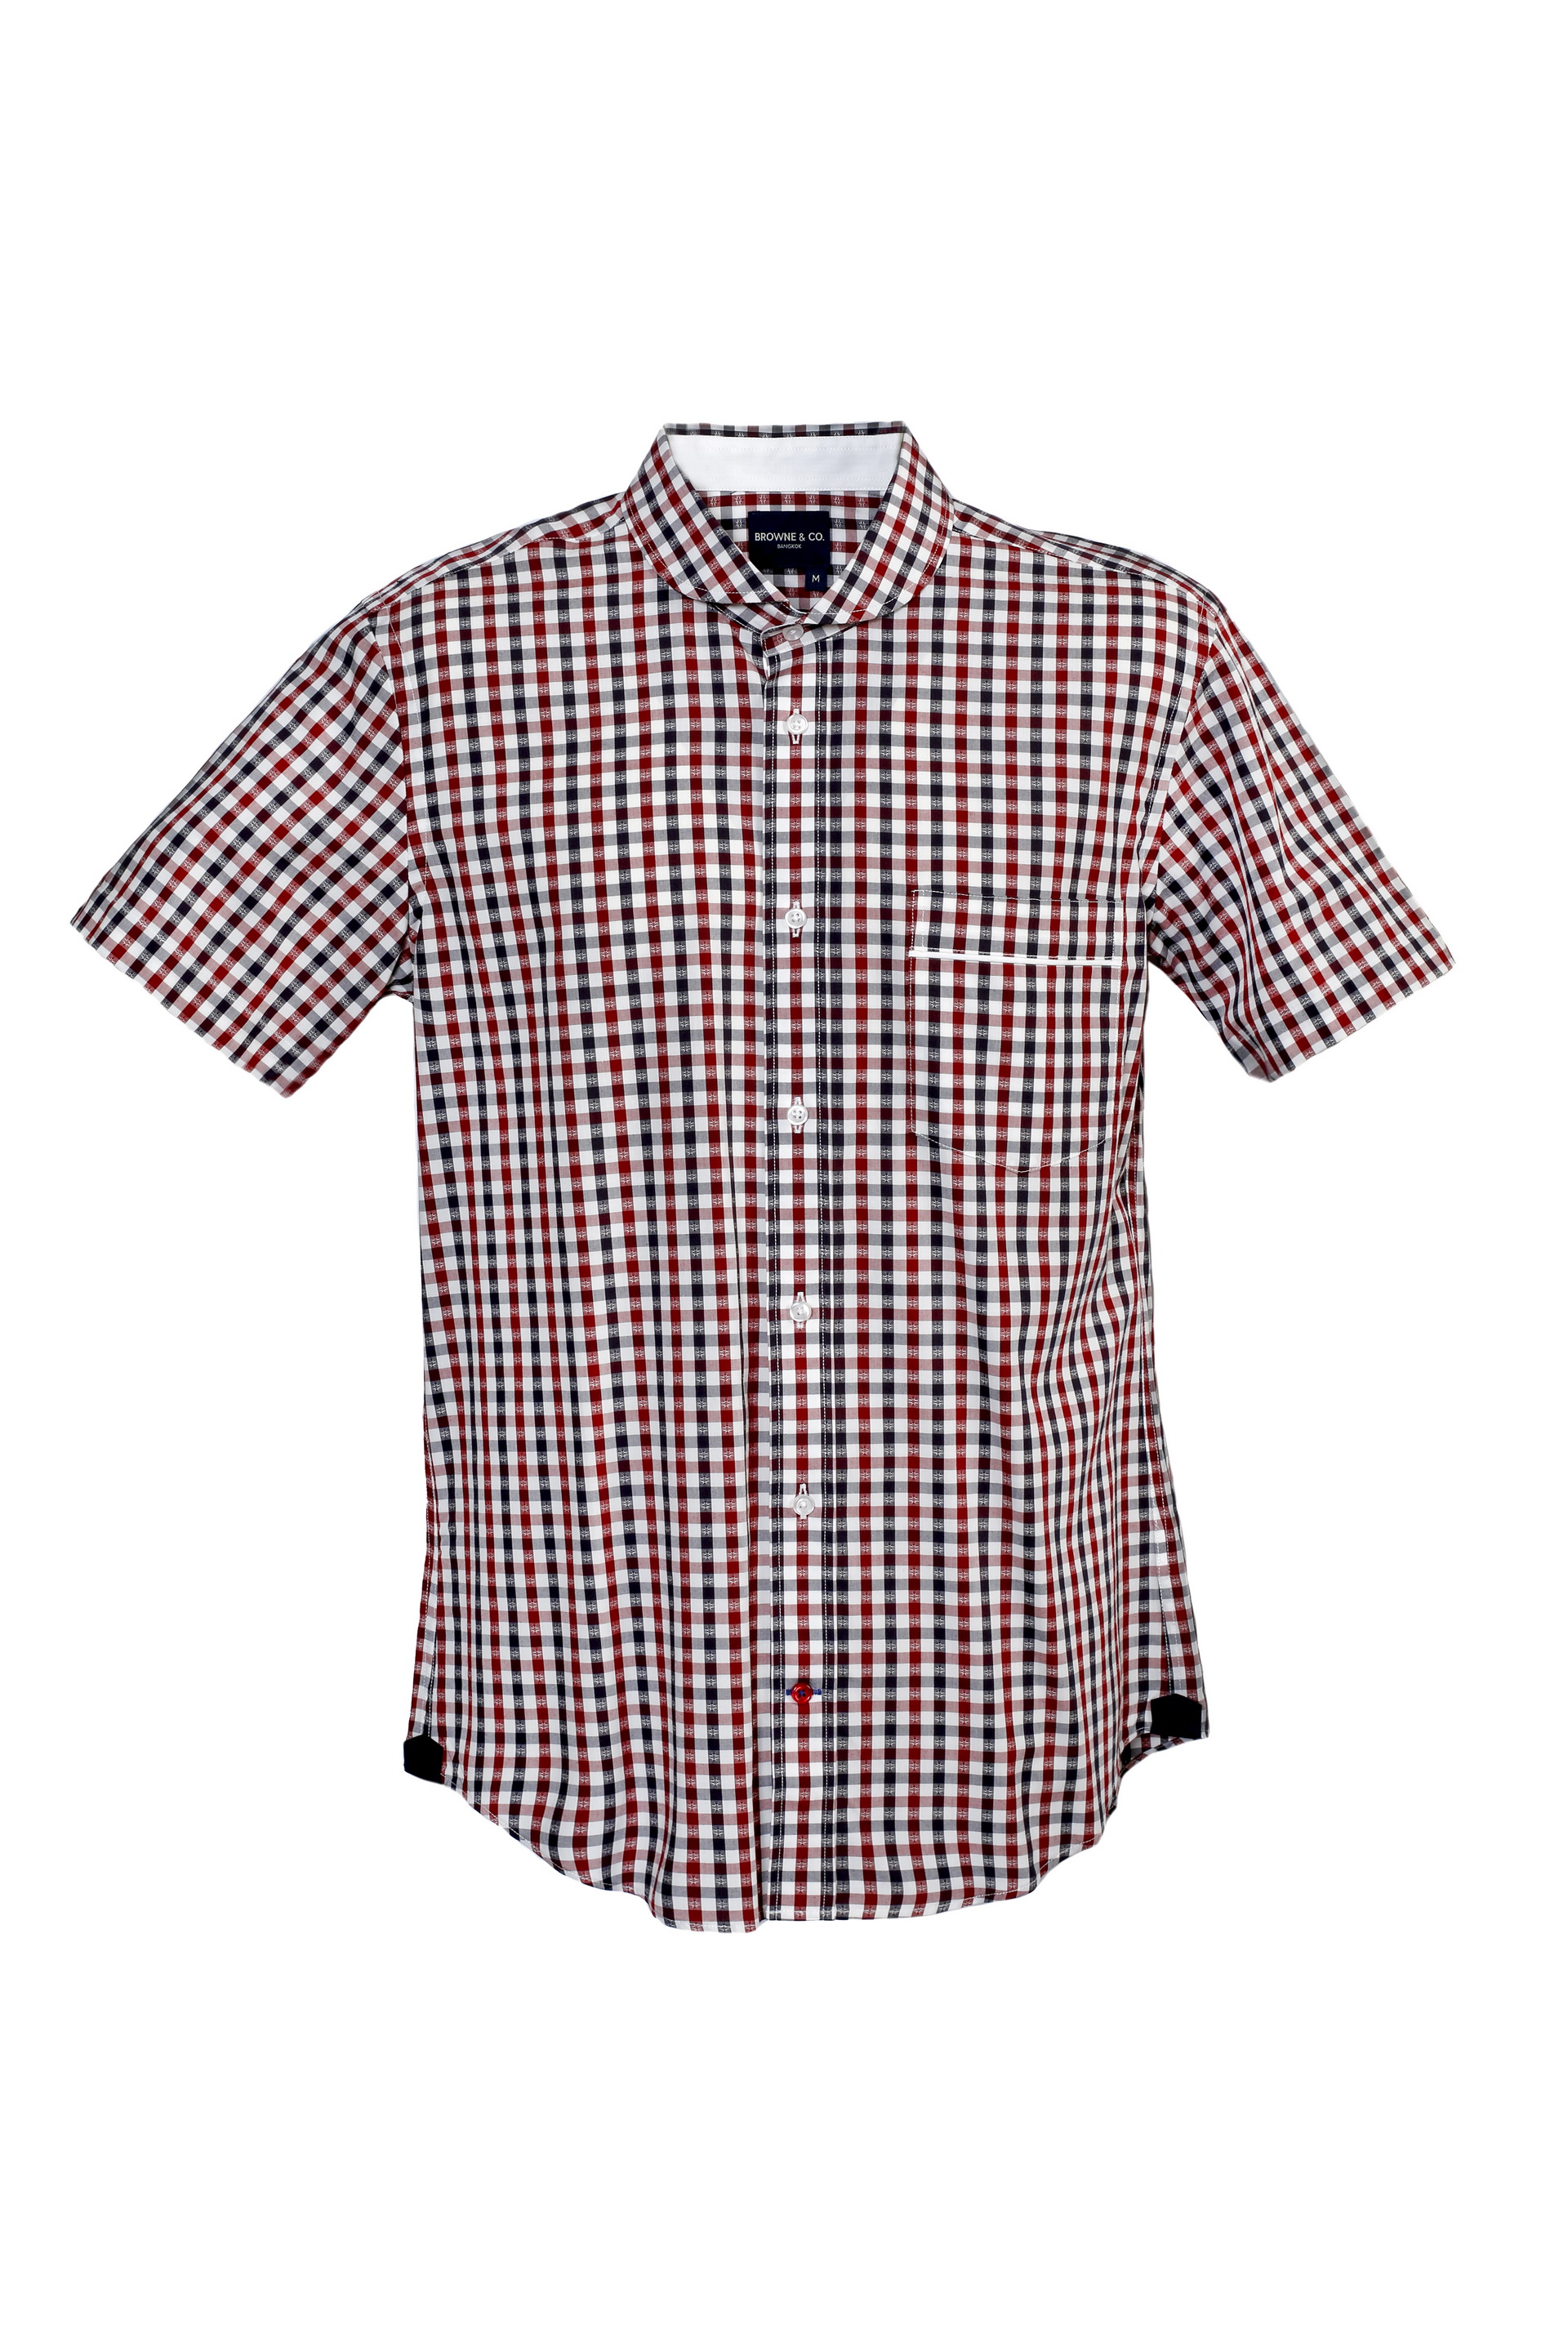 Club Collar Short Sleeves Red and Black Check Shirt – Browneandco.com